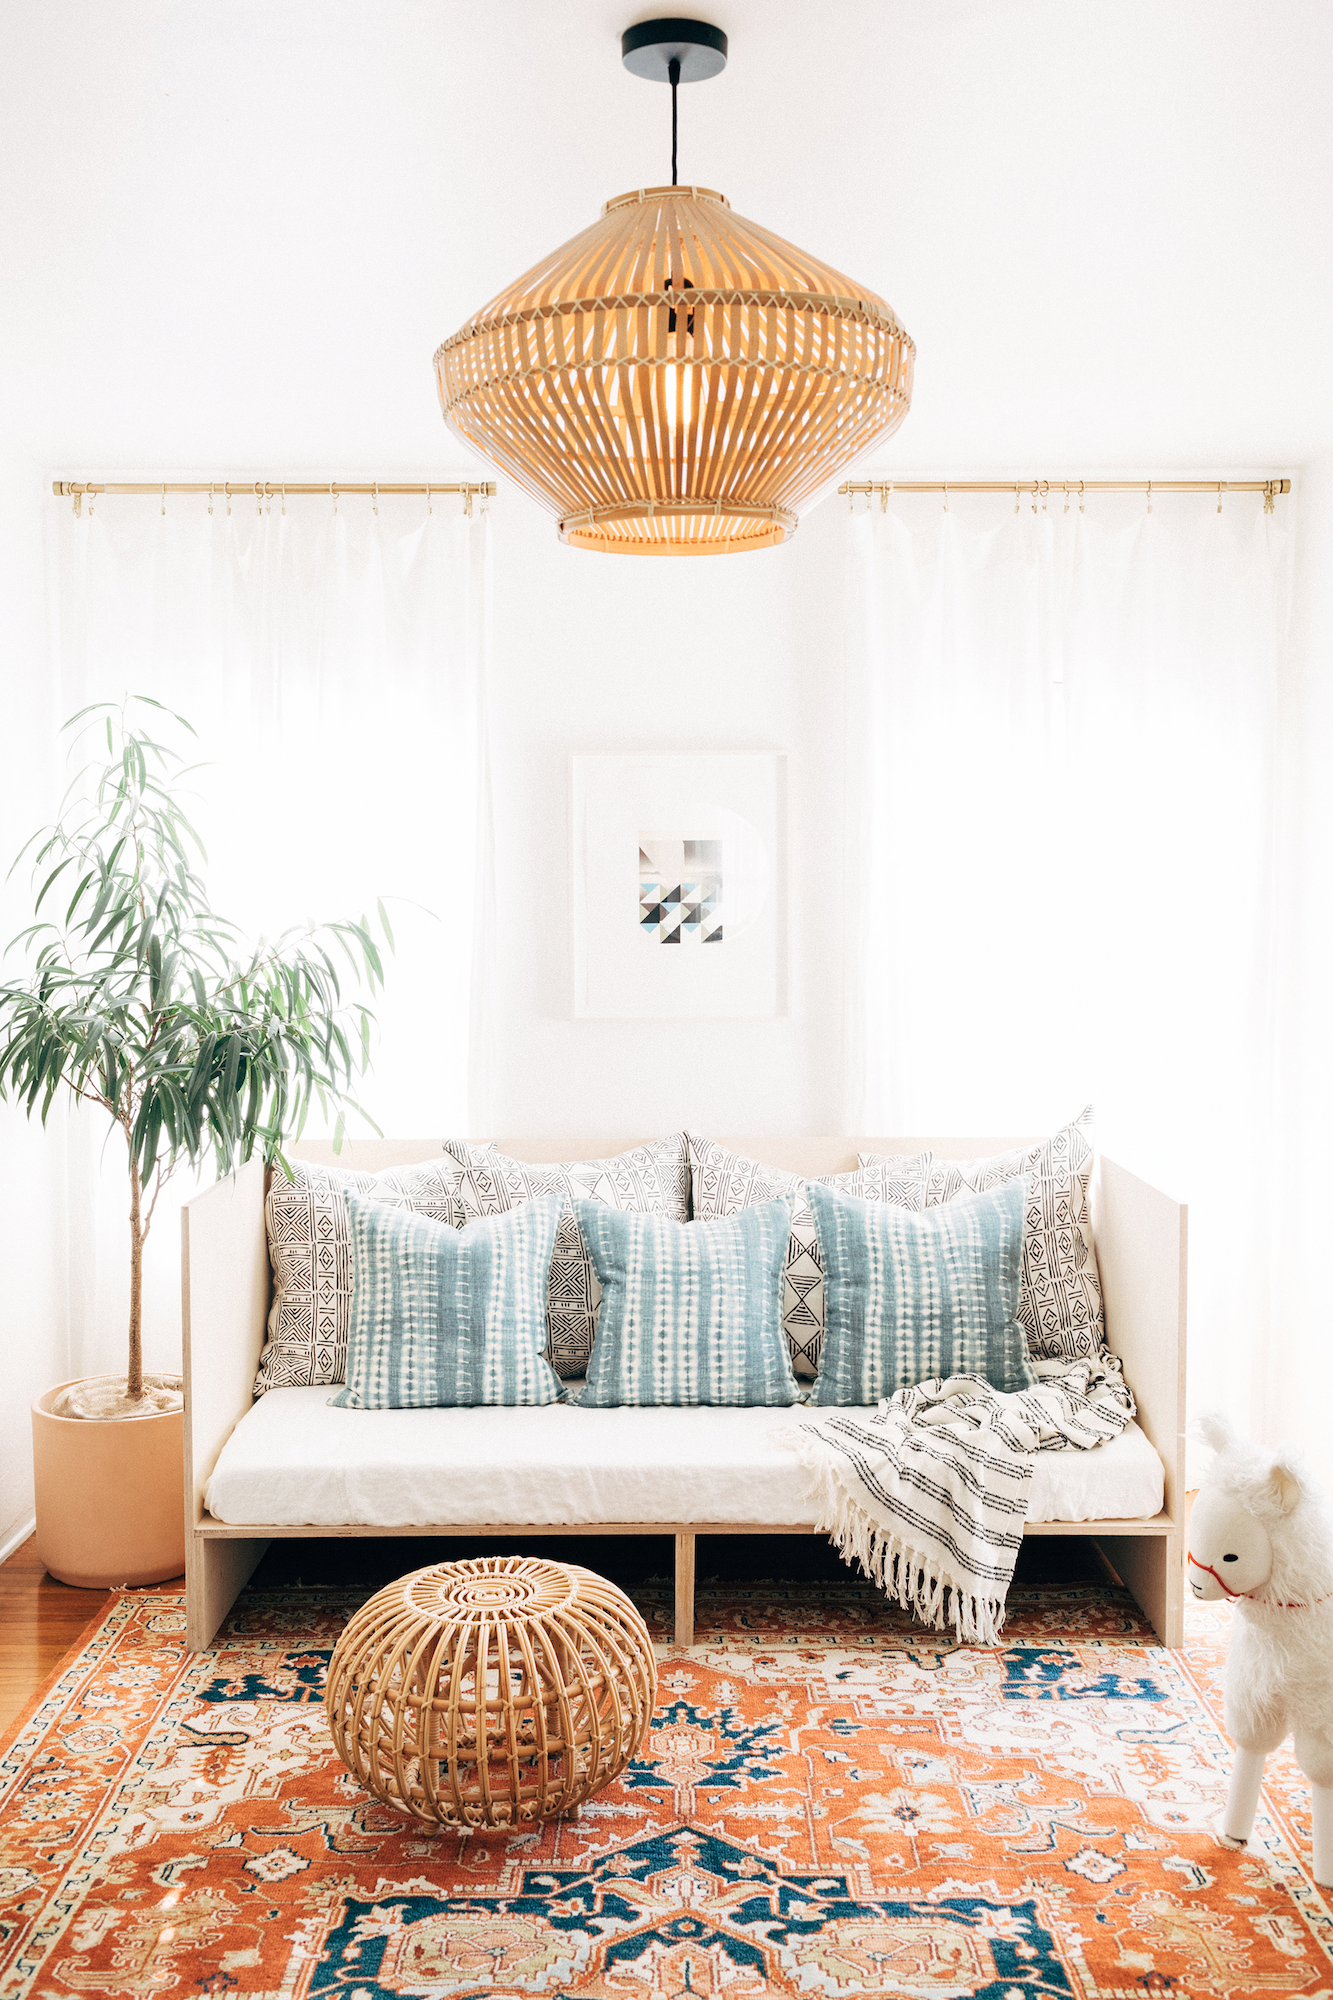 10 Best Diy Furniture Projects In 2018